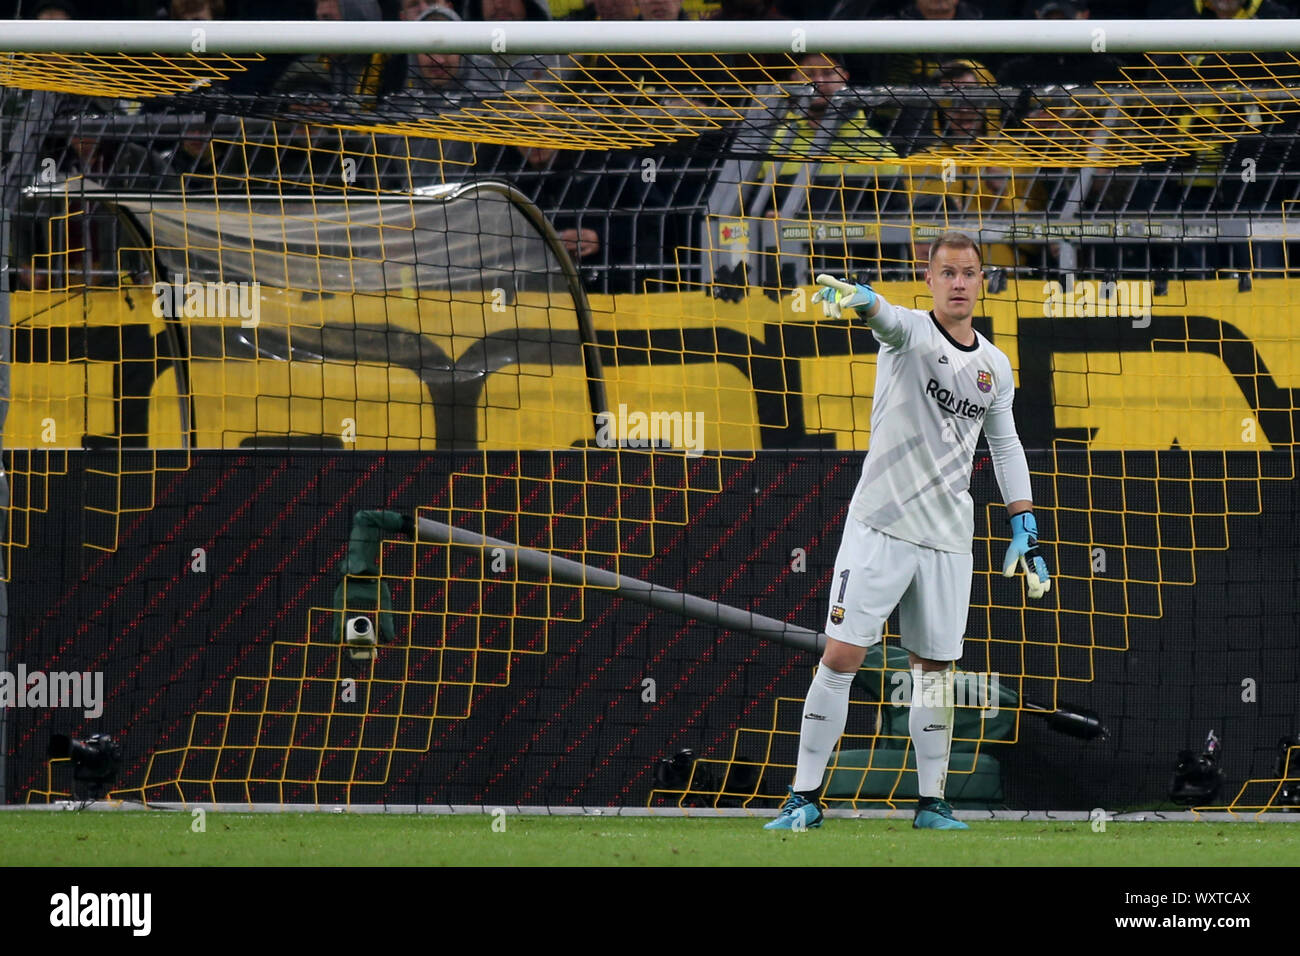 Marc Andre Ter Stegen of FC Barcelona seen in action during the UEFA Champions League match between Borussia Dortmund and FC Barcelona at the Signal Iduna Park in Dortmund.(Final score; Borussia Dortmund 0:0 FC Barcelona) Stock Photo